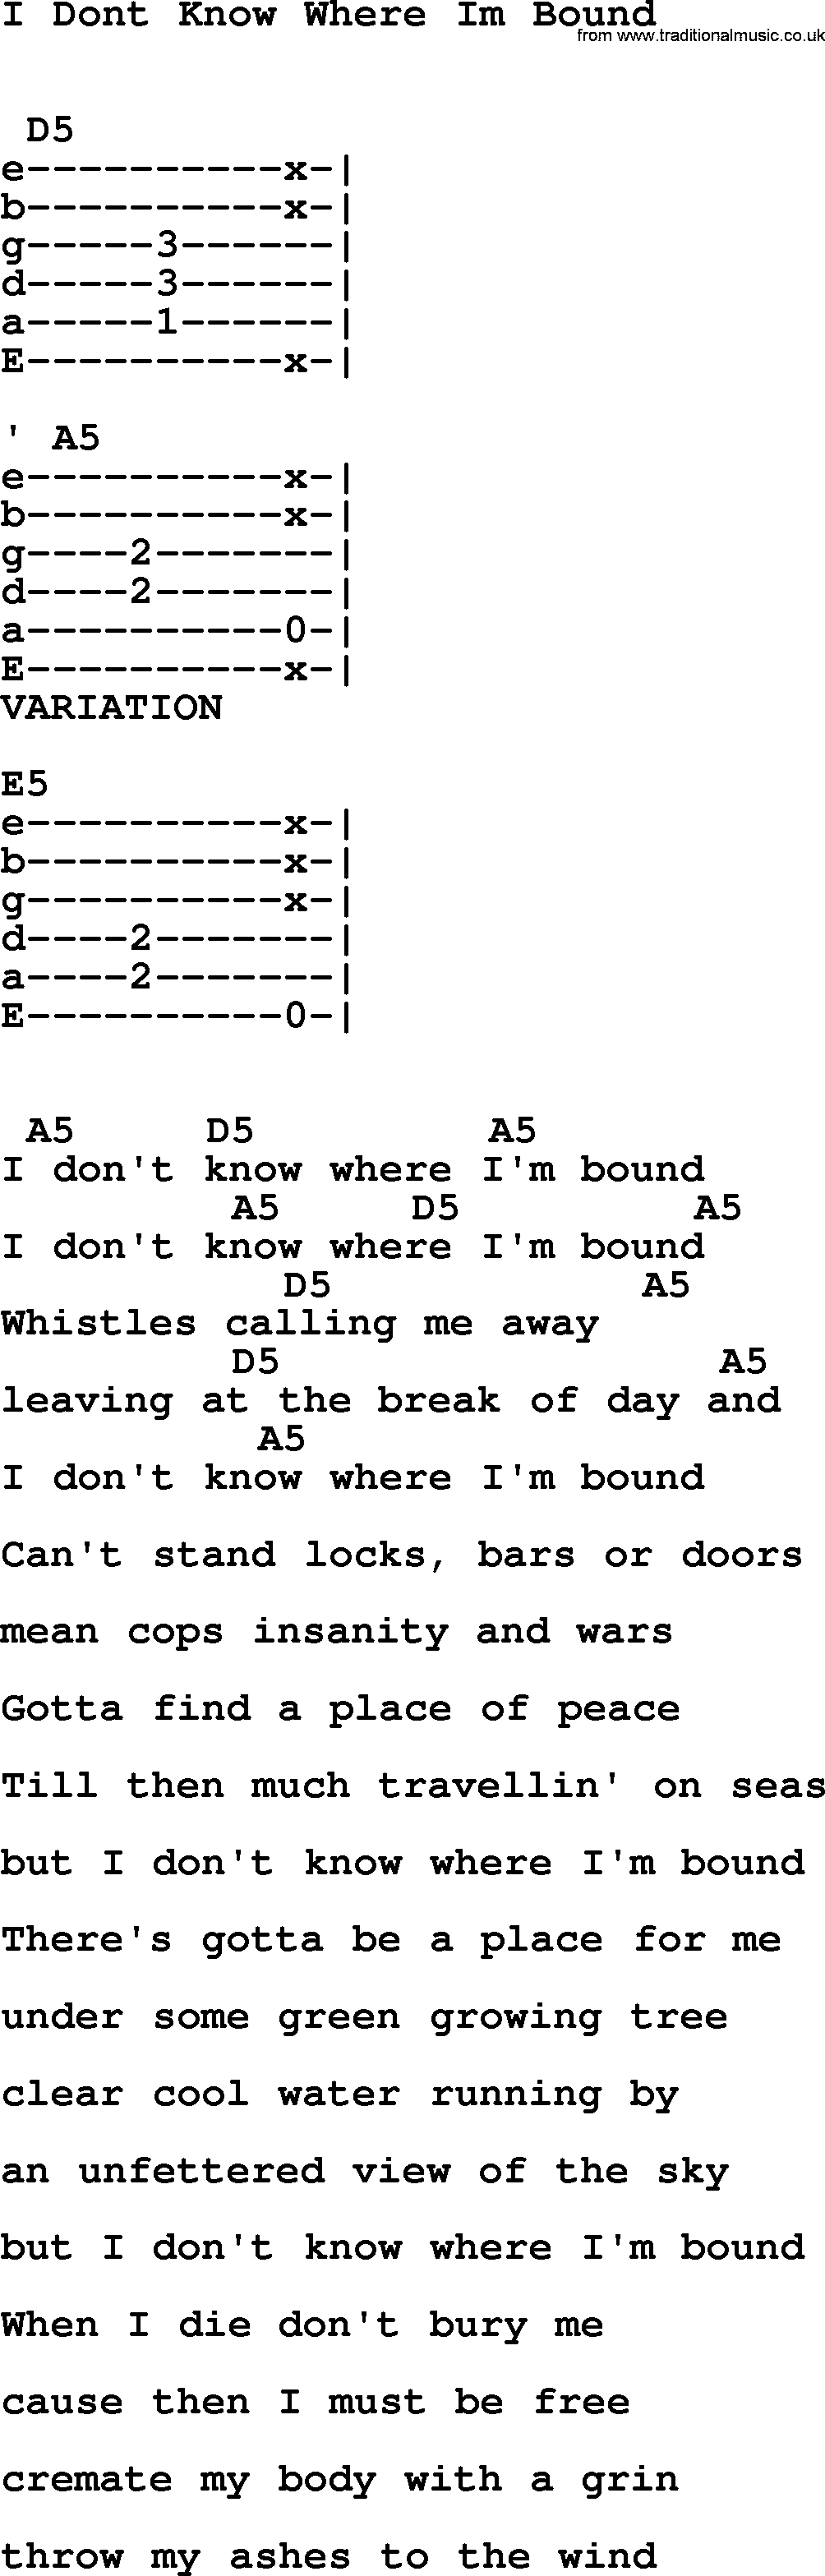 Johnny Cash song I Dont Know Where Im Bound, lyrics and chords